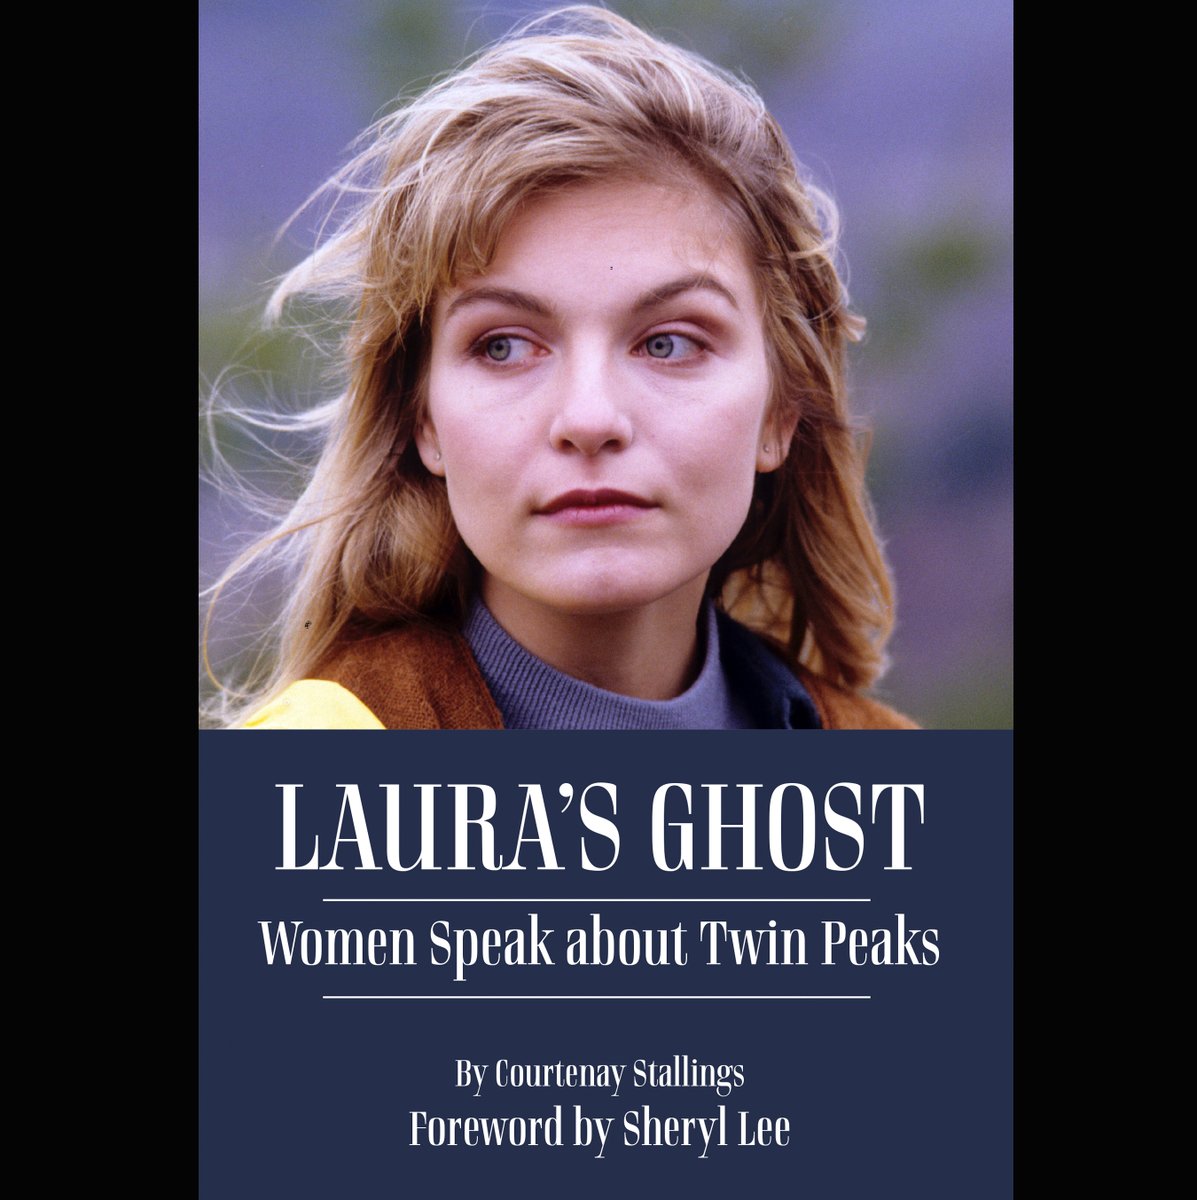 #lauraPalmer takes center stage in @CourtenayCal's LAURA'S GHOST. Interviews with Jen Lynch, Sheryl Lee, Grace Zambriskie and many women in the #twinpeaks community. On Sale or #twinpeaks Pilot Day bluerosemag.com/?product=laura…